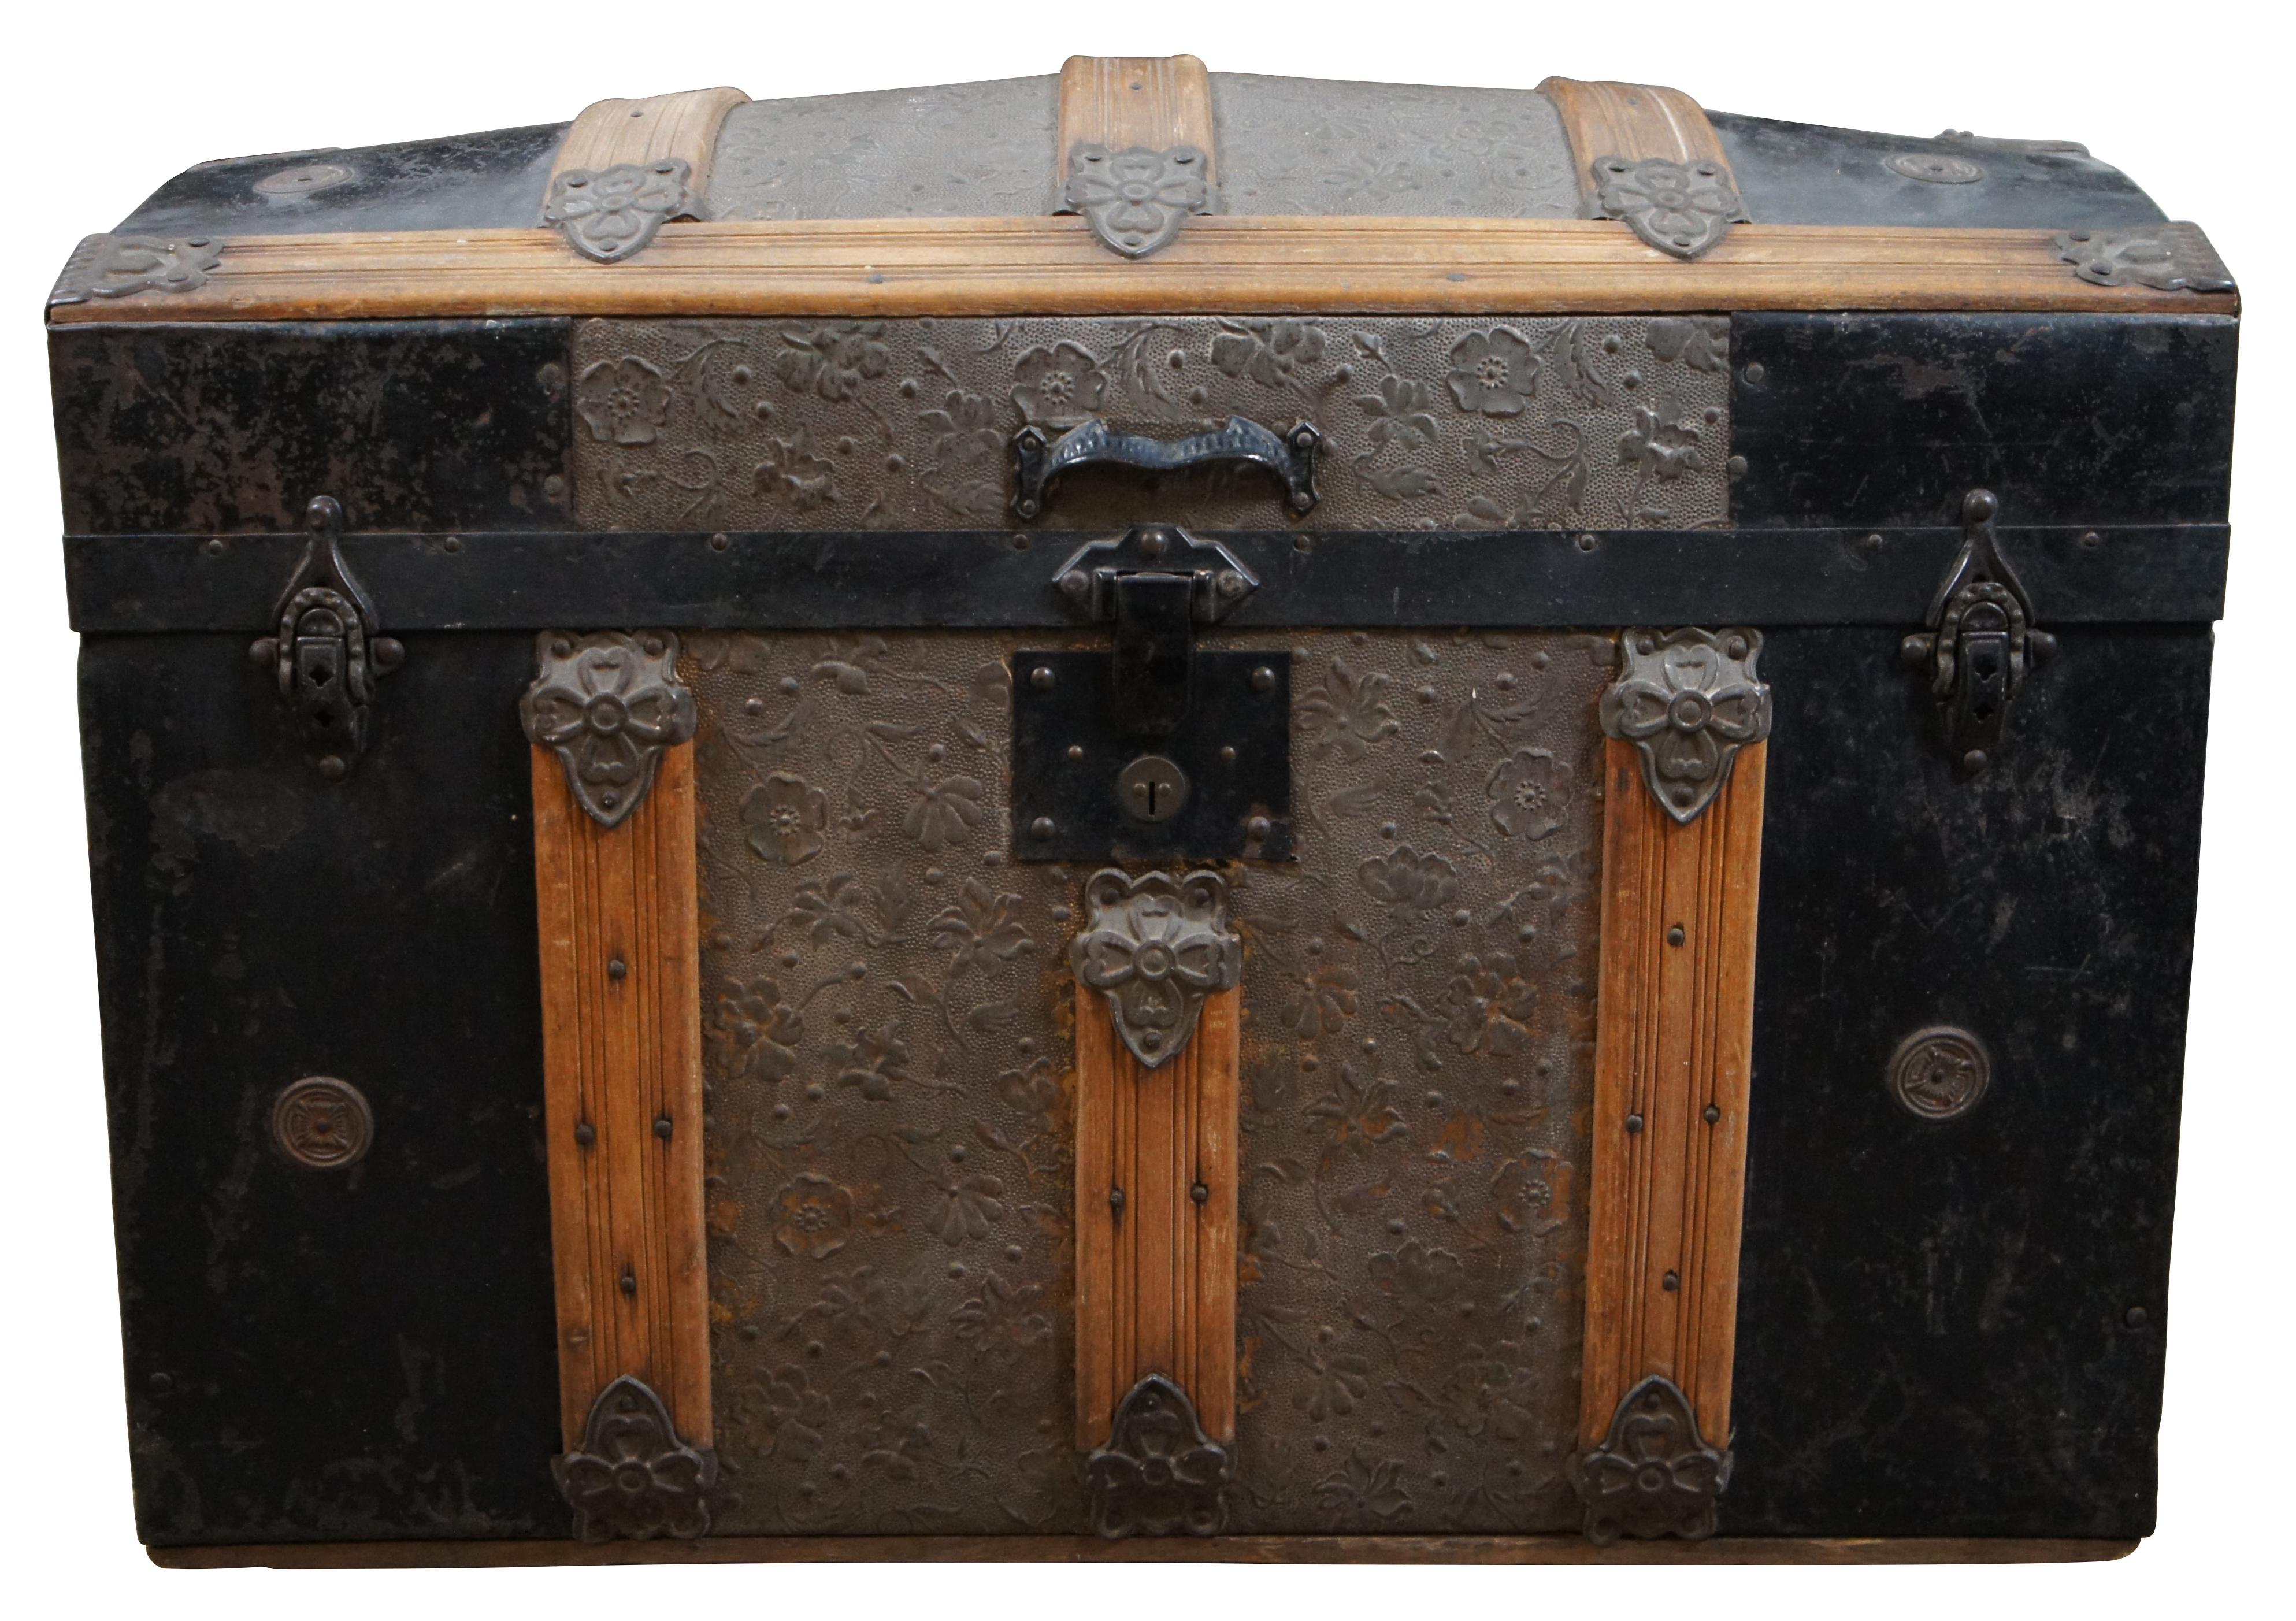 Antique Victorian era dome top / hump back style steamer trunk made of oak and metal with floral embossed metal panels, four castors on the base, containing the original cardboard / paper mache interior compartment in the lid and removable tray,